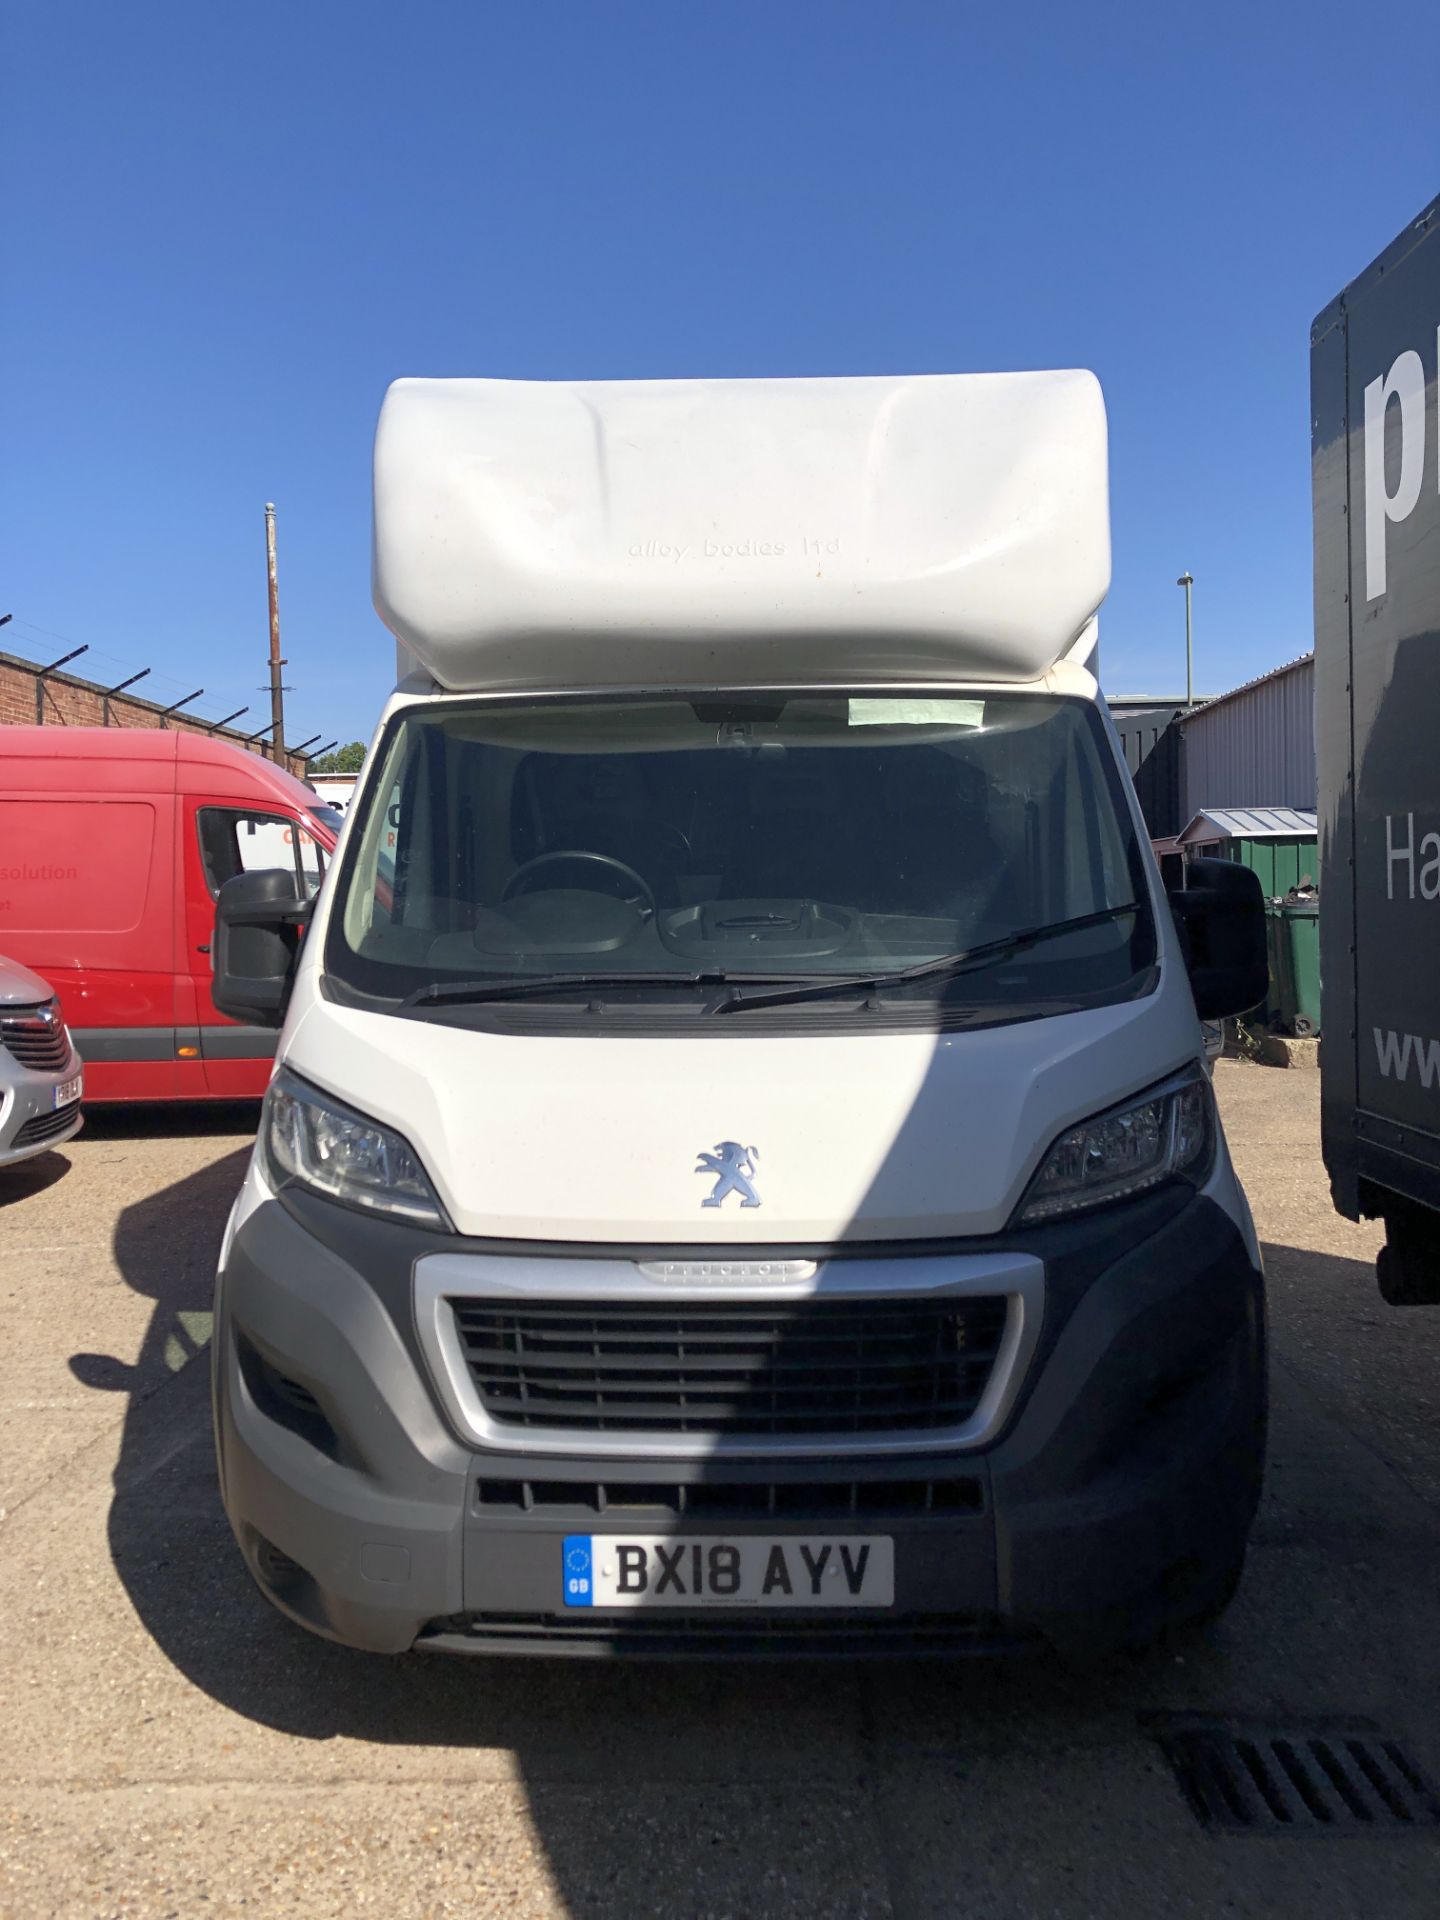 Peugeot Boxer 335 L3 Blue HDI Luton Van with tail lift - Image 2 of 9